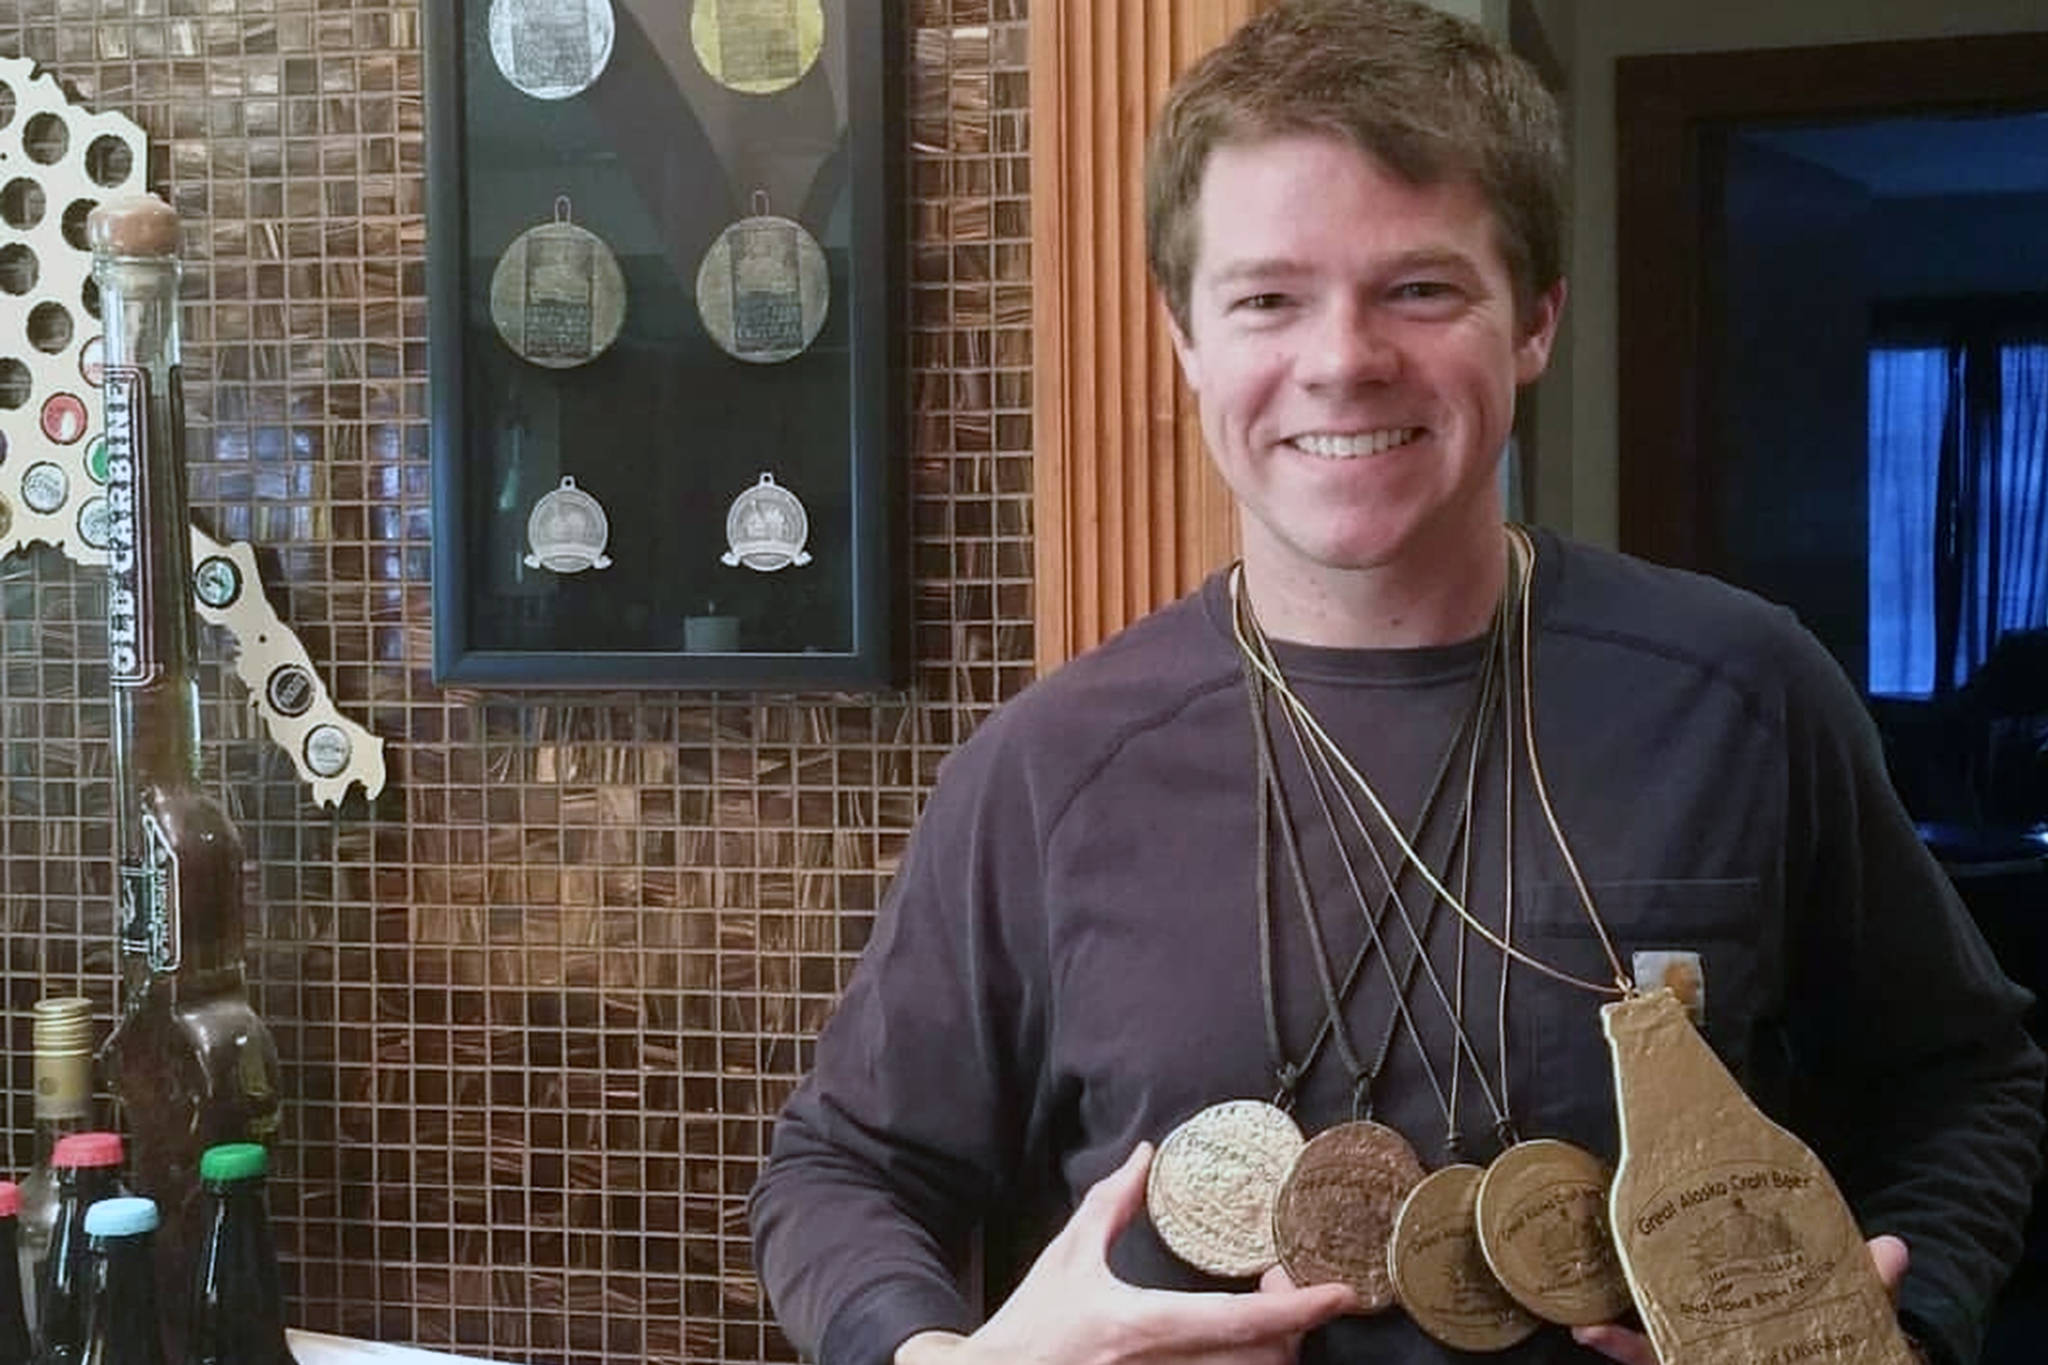 David Howard, who placed in multiple categories at Great Alaska Craft Beer and Homebrew Festival, shows off medals he’s won in past festivals. (Courtesy Photo | Alexis Howard)